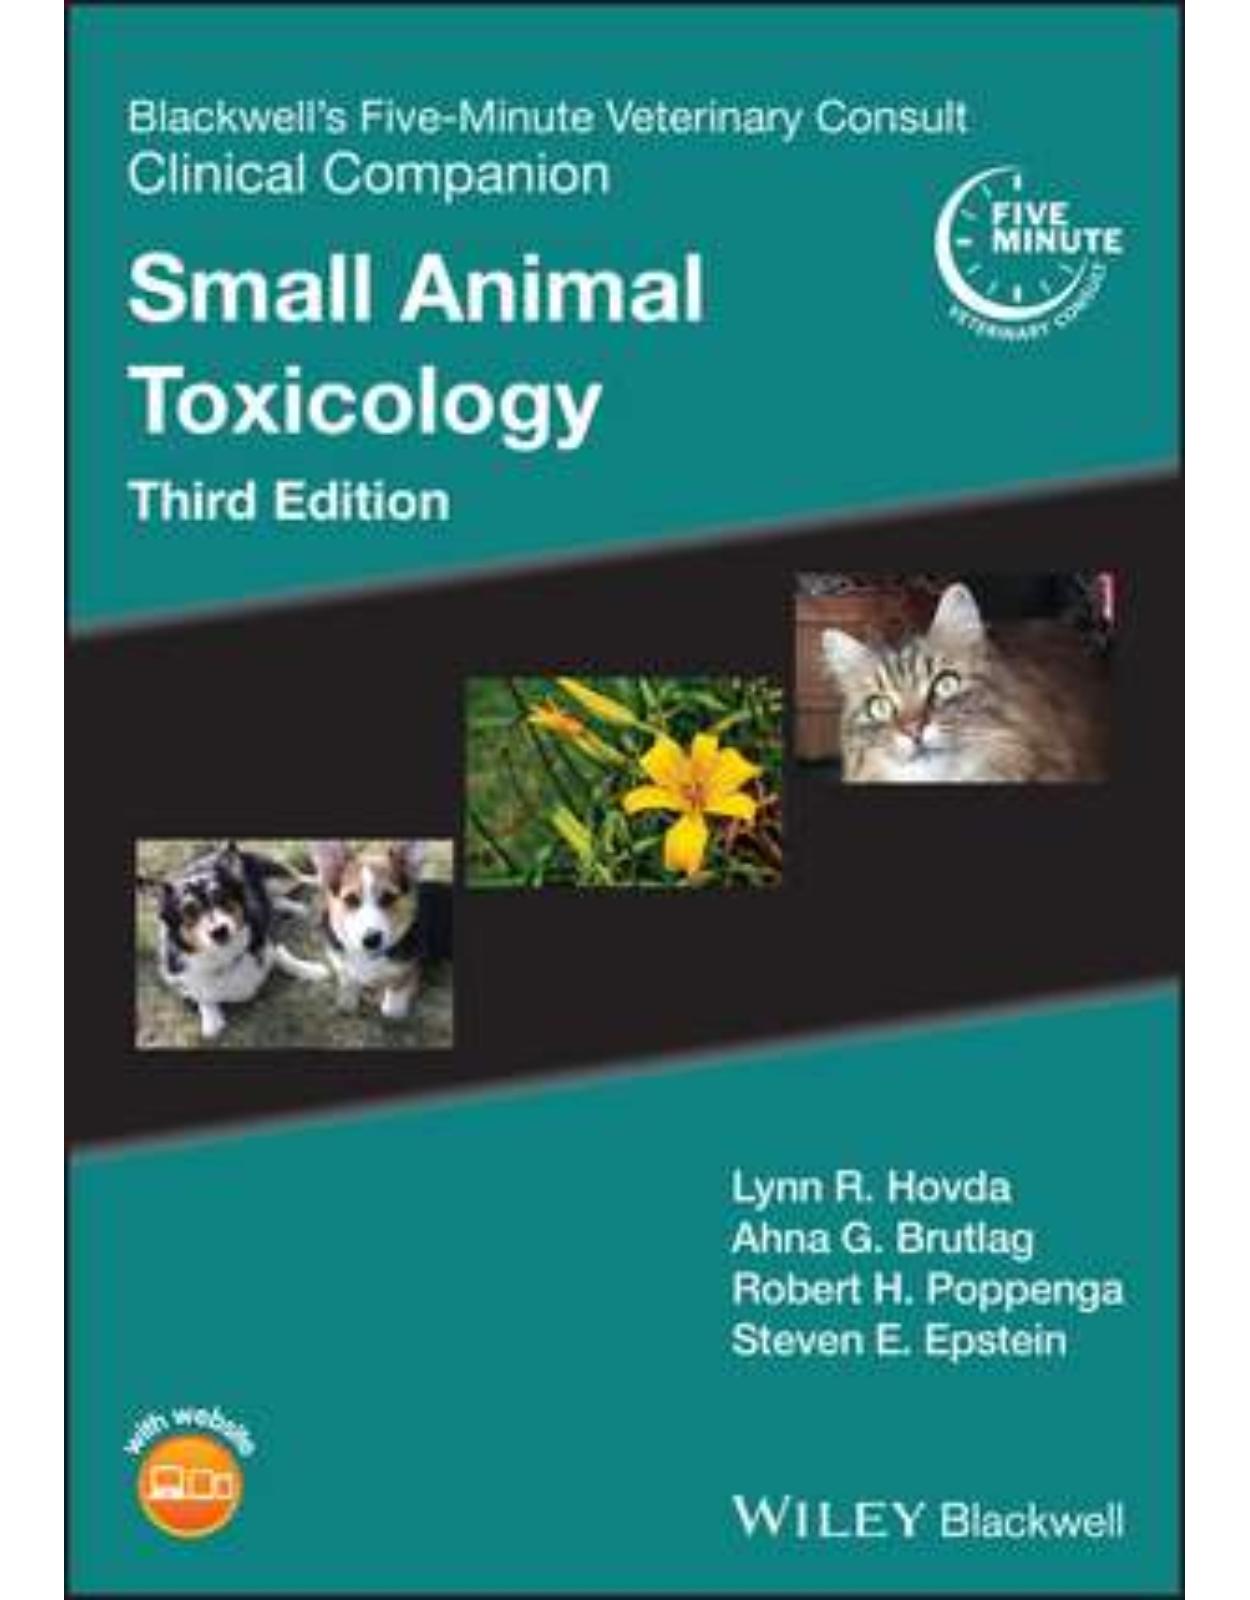 Blackwells Five-Minute Veterinary Consult Clinical Companion: Small Animal Toxicology, 3rd Edition